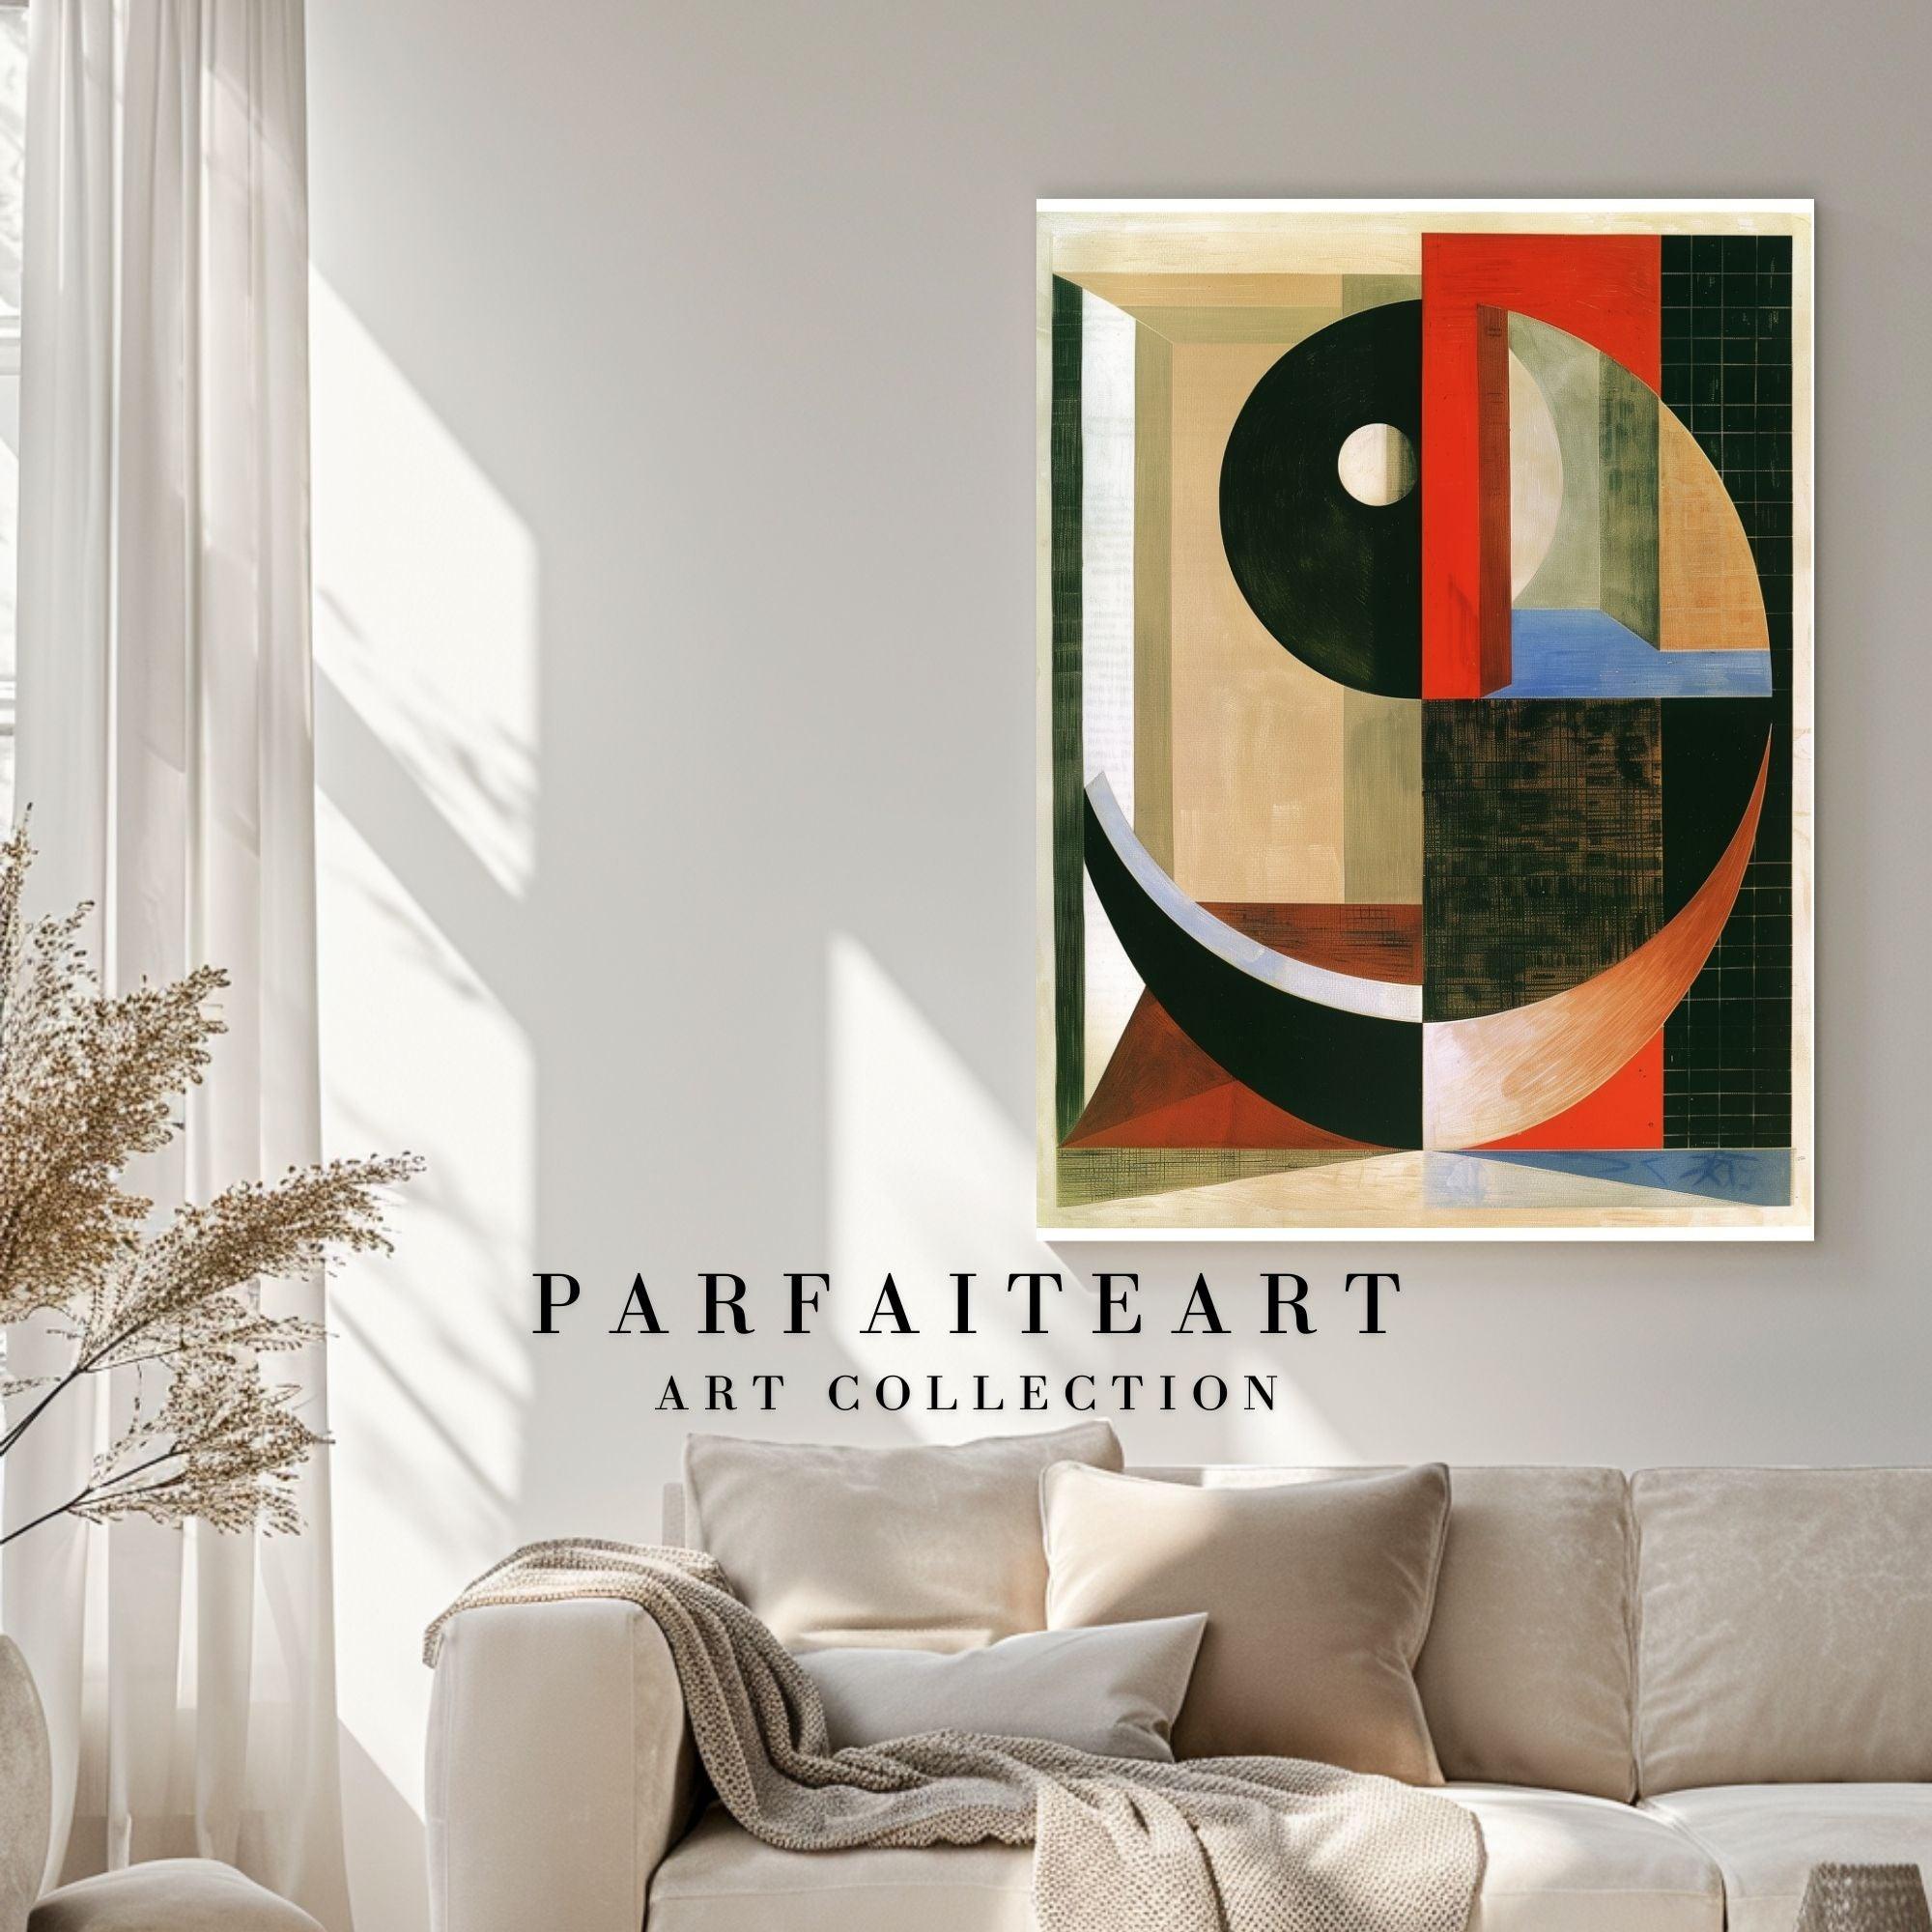 Abstract Art,Canvas Prints,Morden Style,Illustration,Museum-Quality Printing A2 - ParfaiteArt